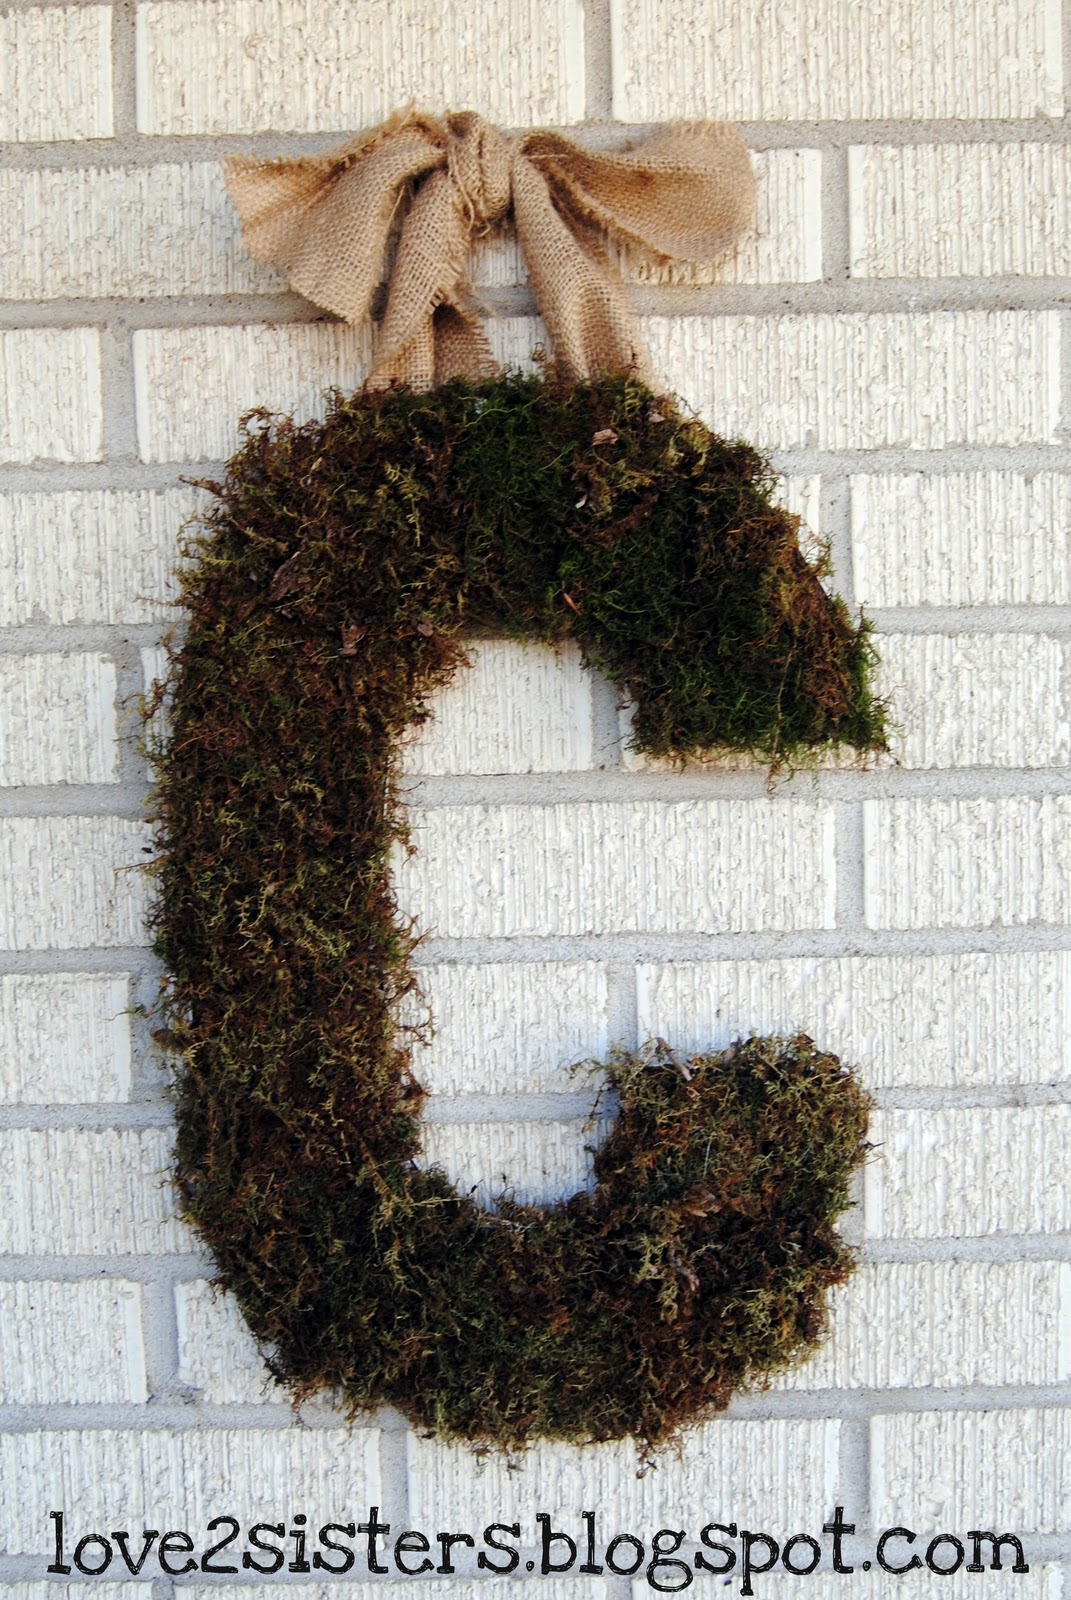 Peace, Love, 2 Sisters: Show and Tell Monday- Moss Initial